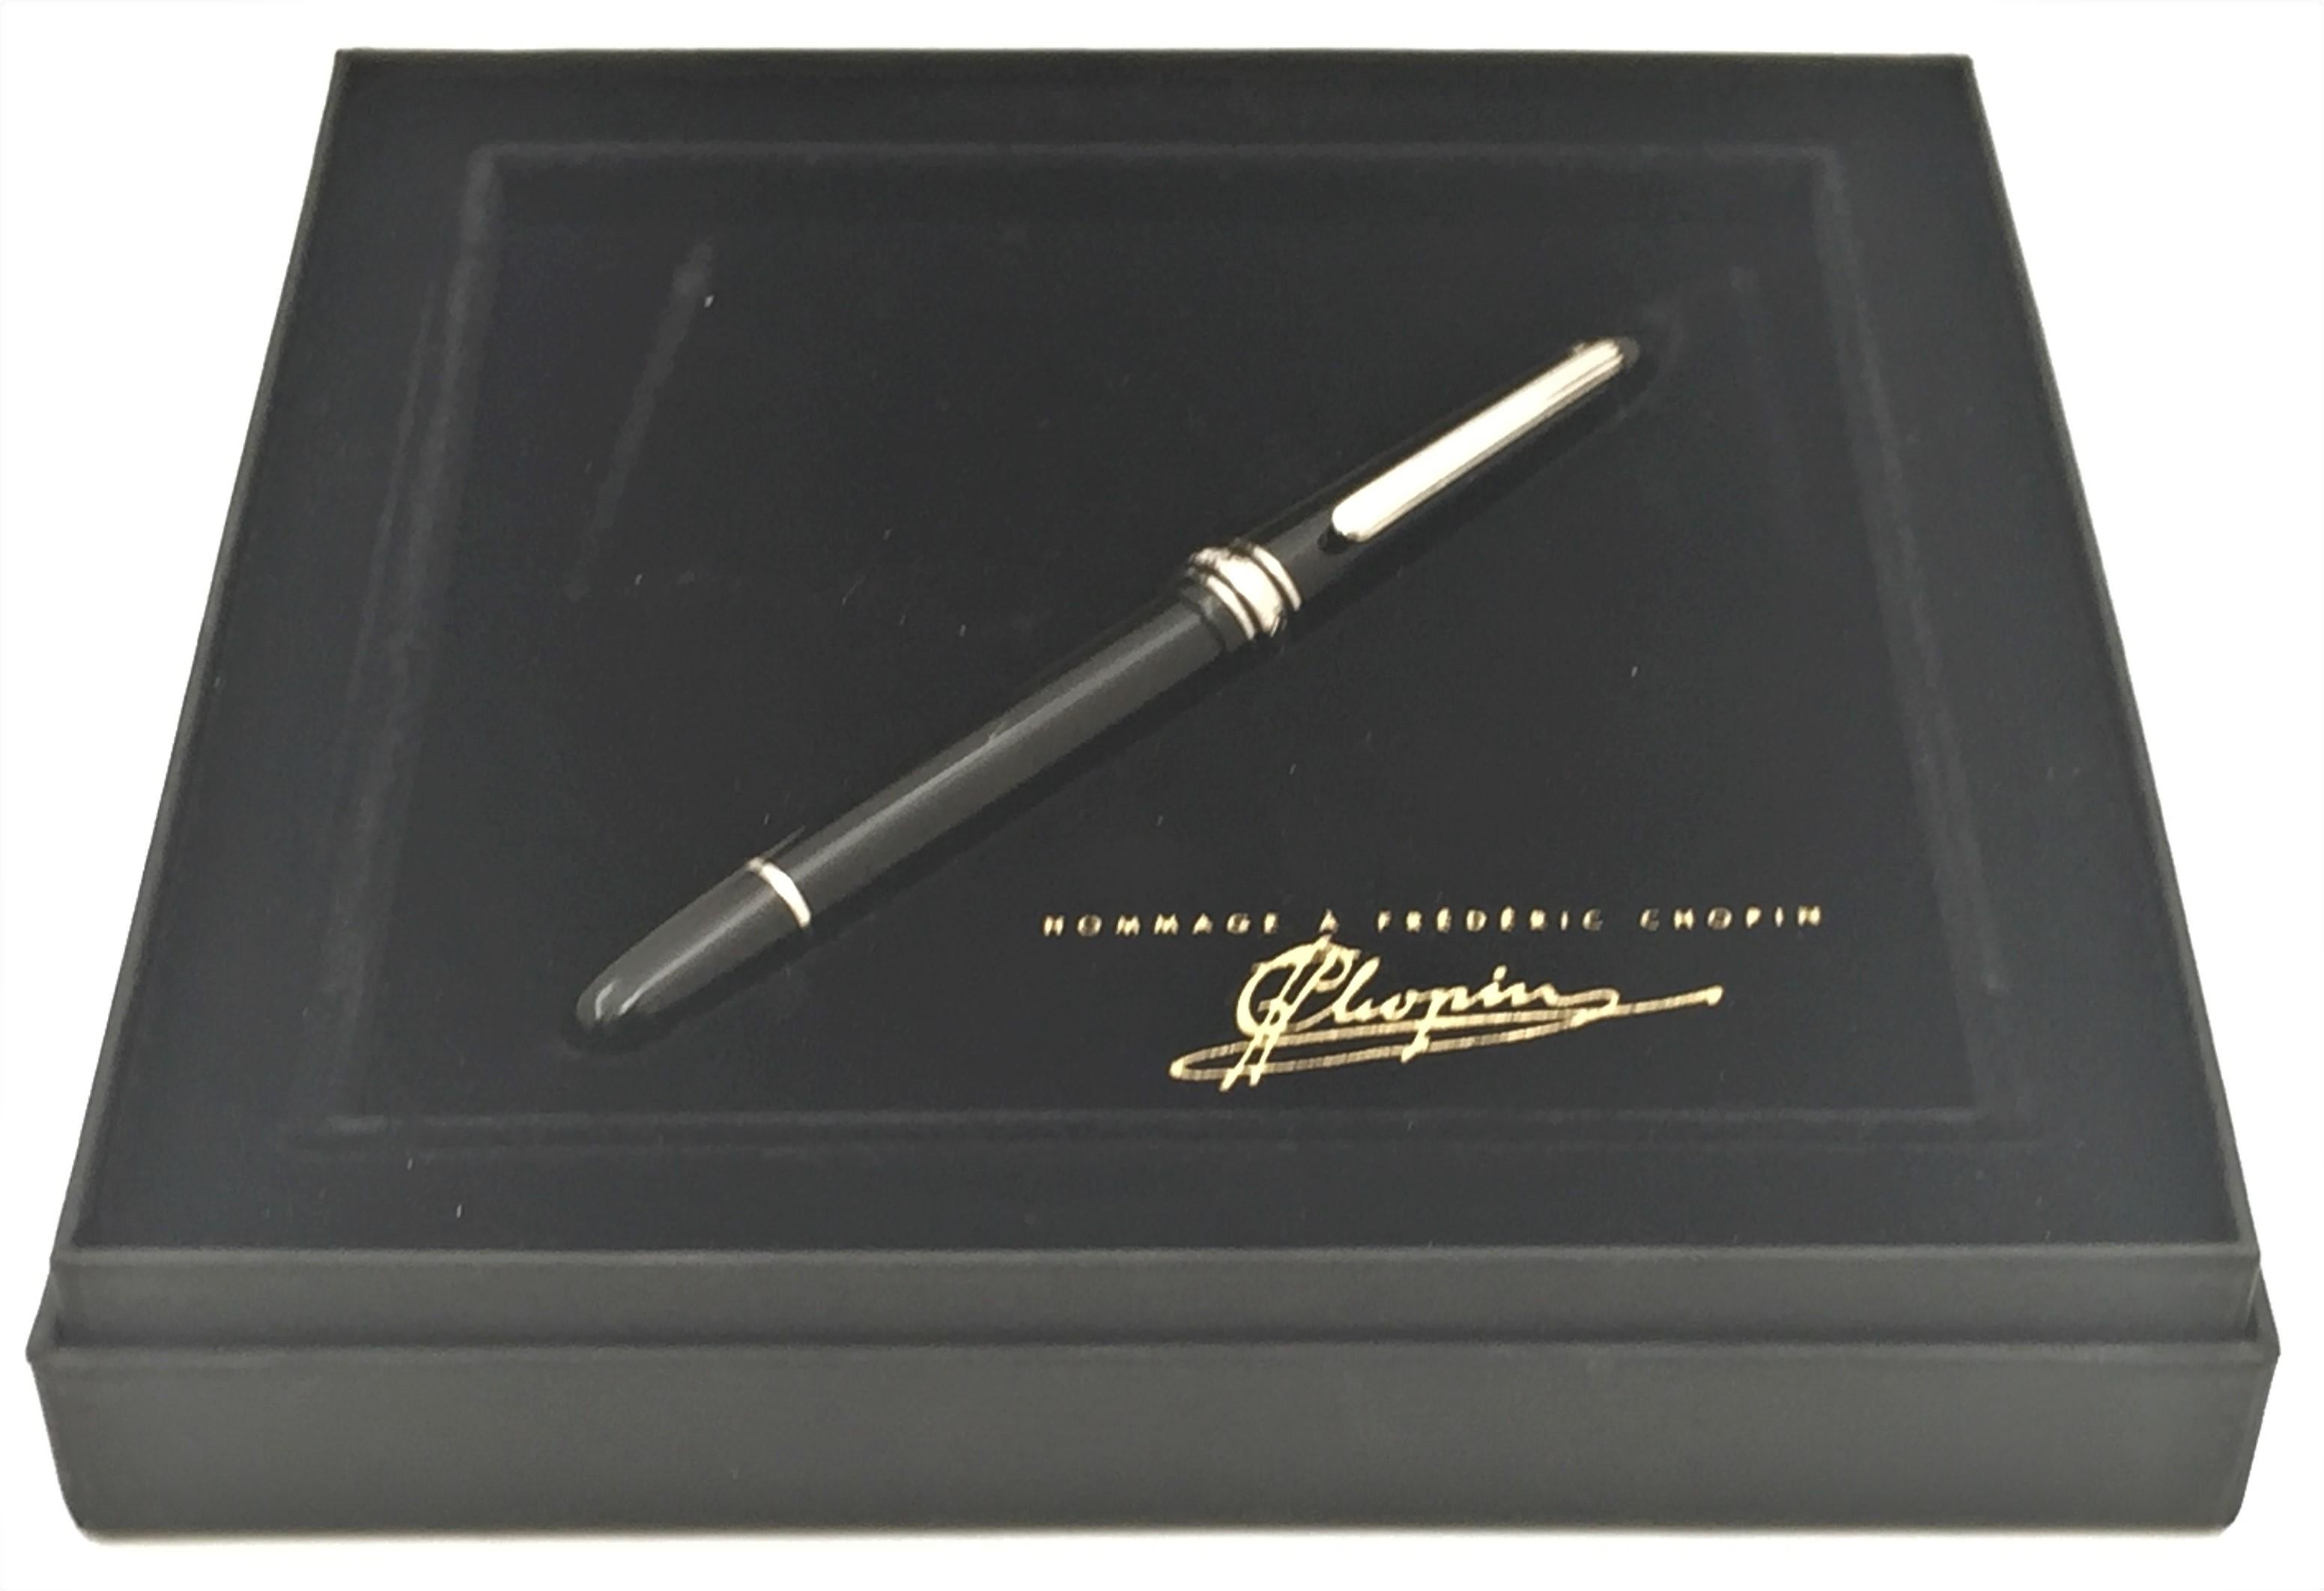 German Montblanc Hommage À Frederic Chopin Limited Edition Fountain Pen